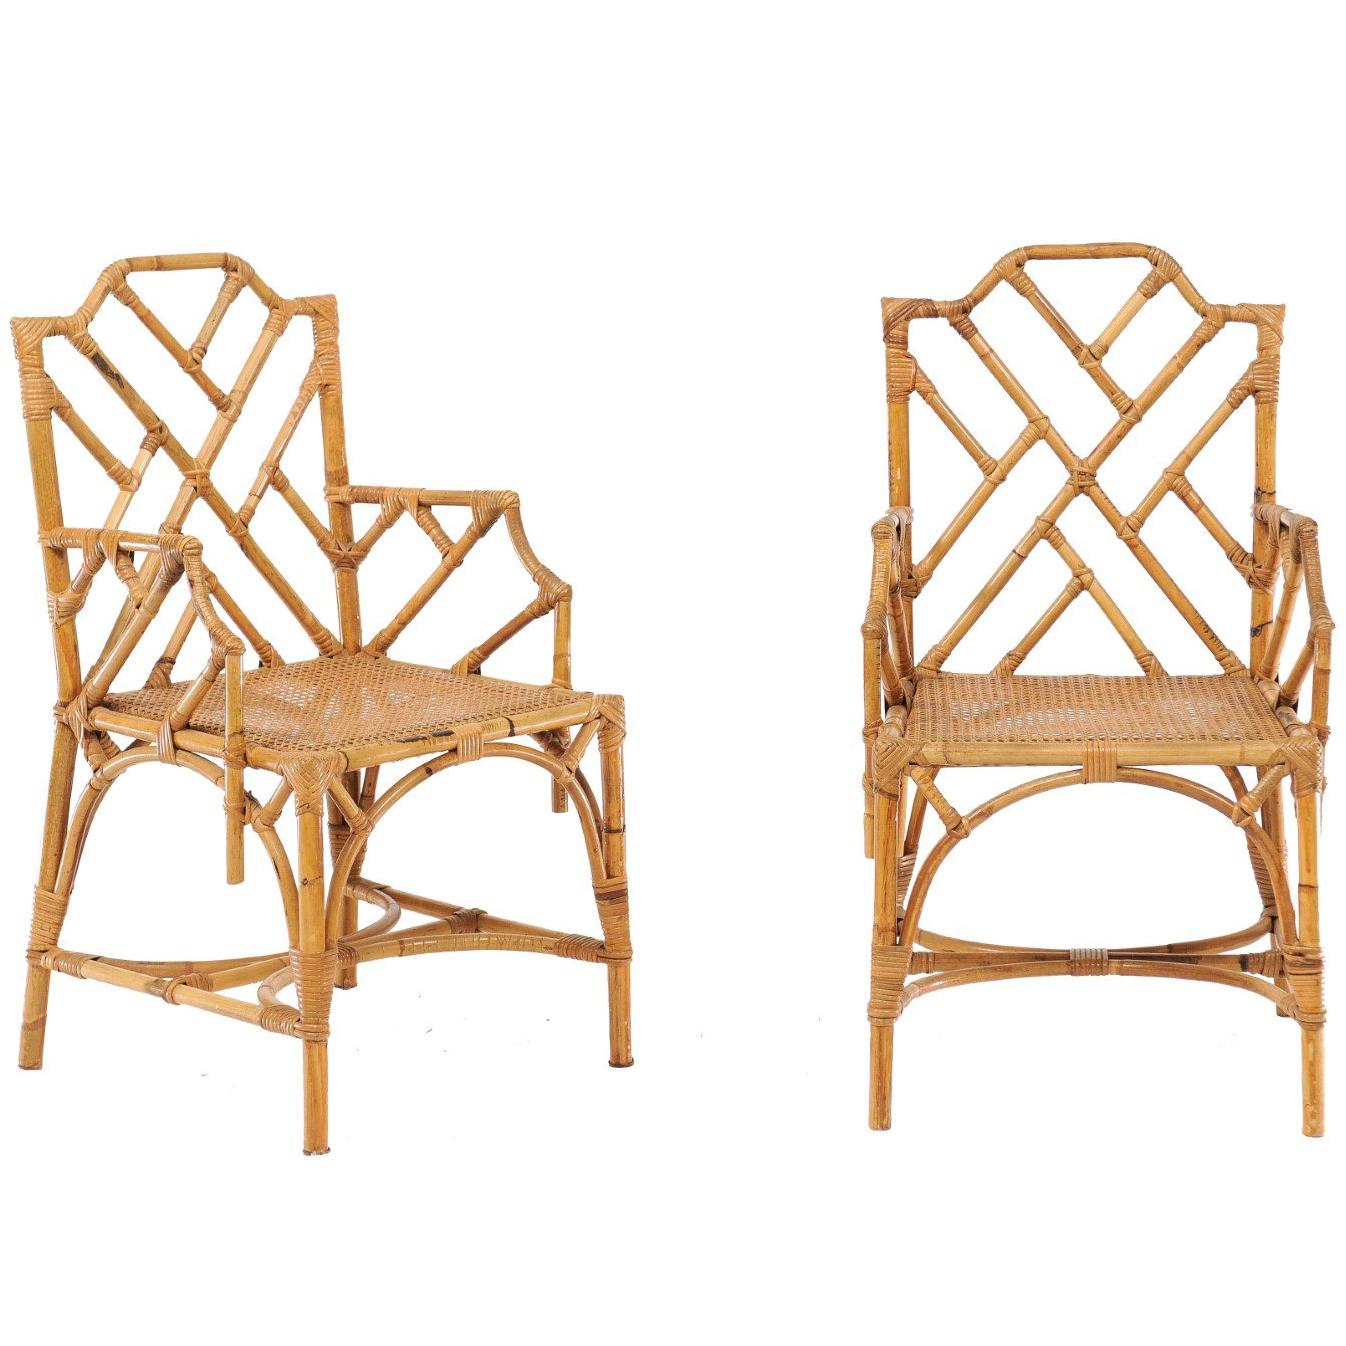 Pair of Vintage Chinese Chippendale Rattan Chairs from the Mid-20th Century